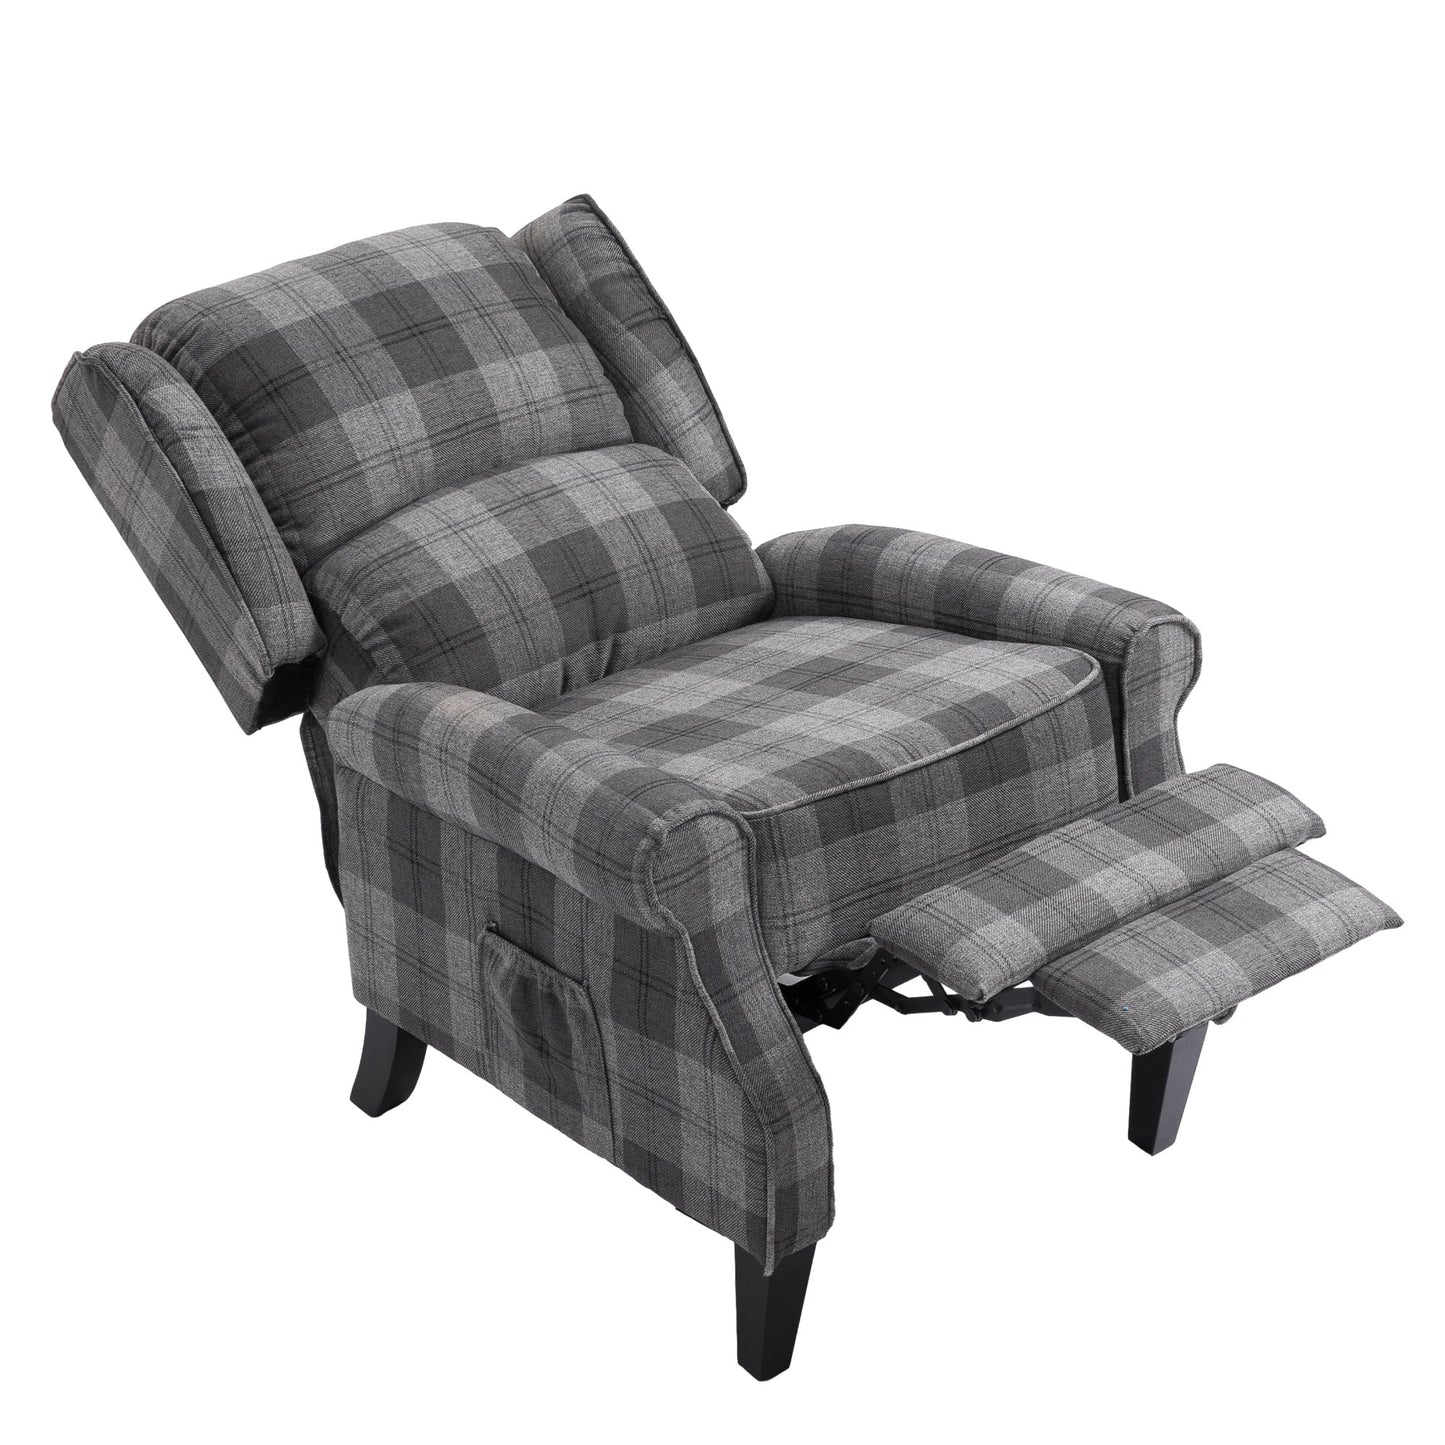 Vintage Armchair Sofa Comfortable Upholstered leisure chair / Recliner Chair for Living Room(Grey Check) Home Decor by Design